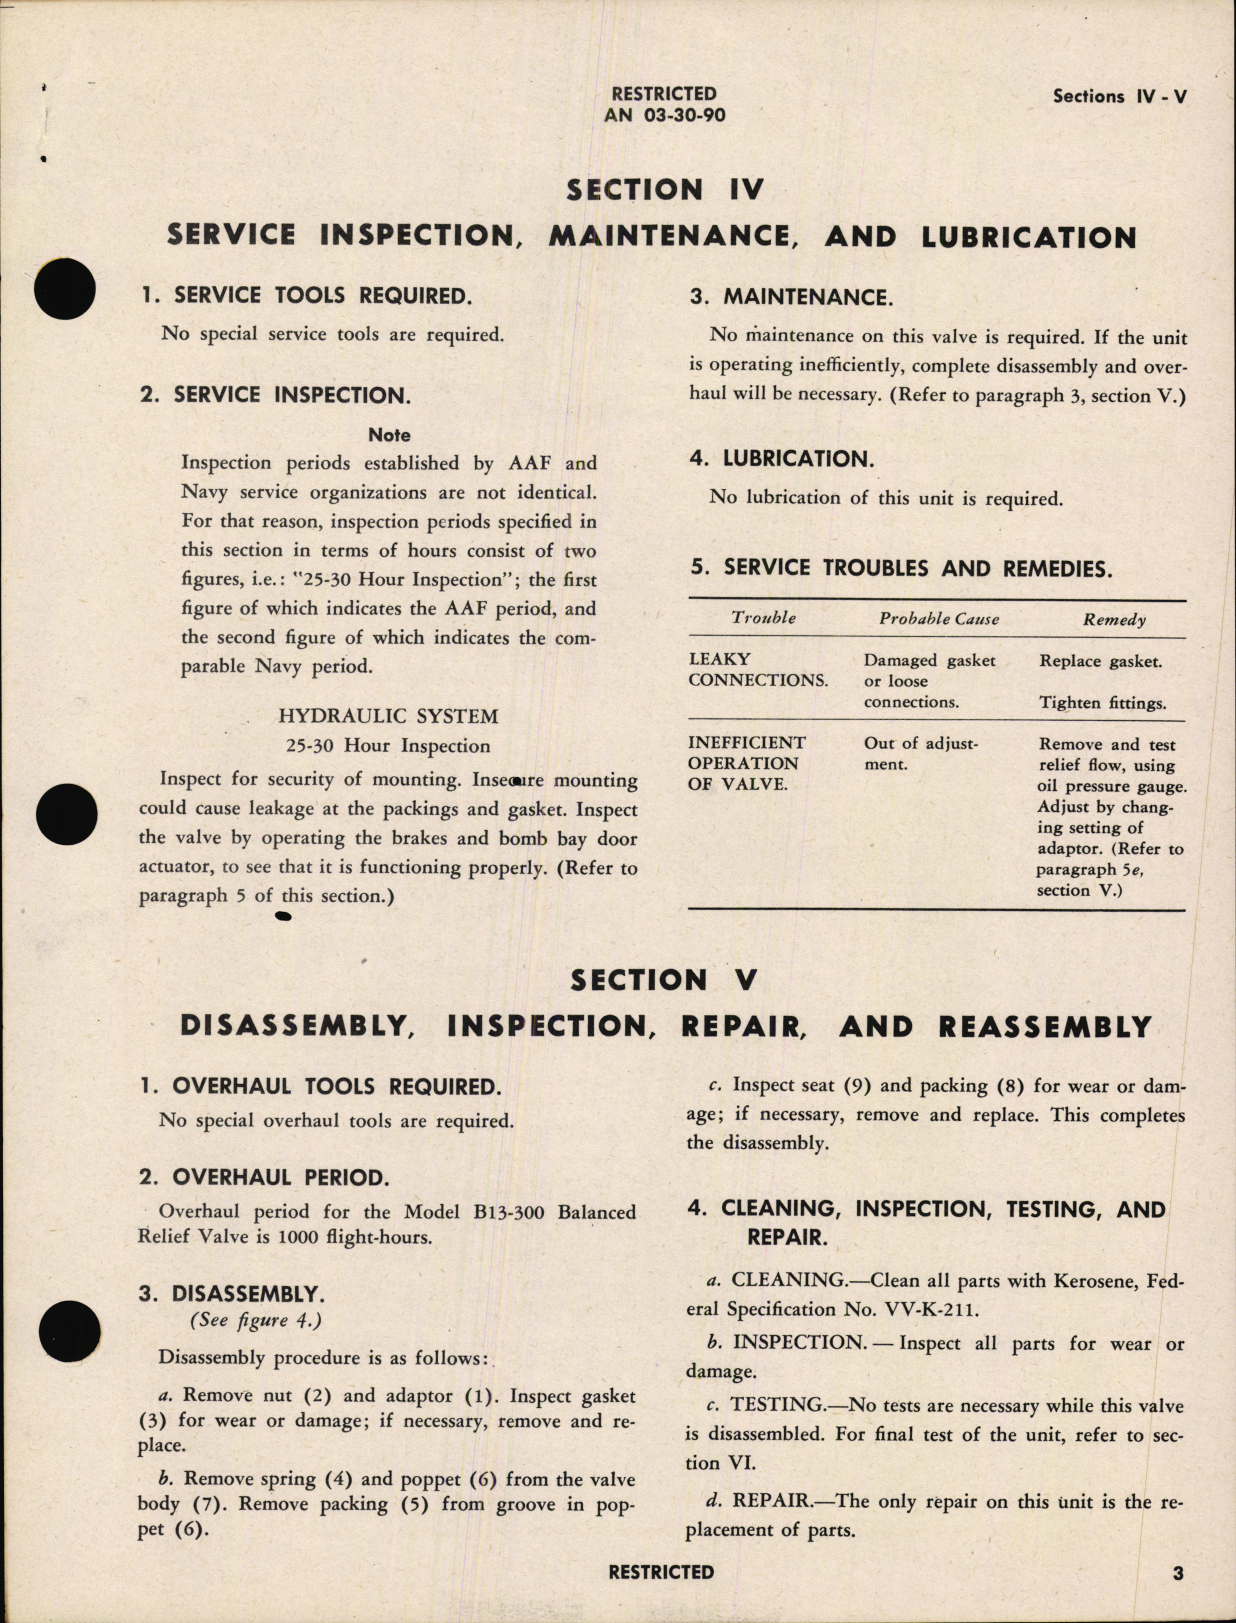 Sample page 7 from AirCorps Library document: Handbook of Instructions with Parts Catalog for Model B13-300 Balanced Relief Valve